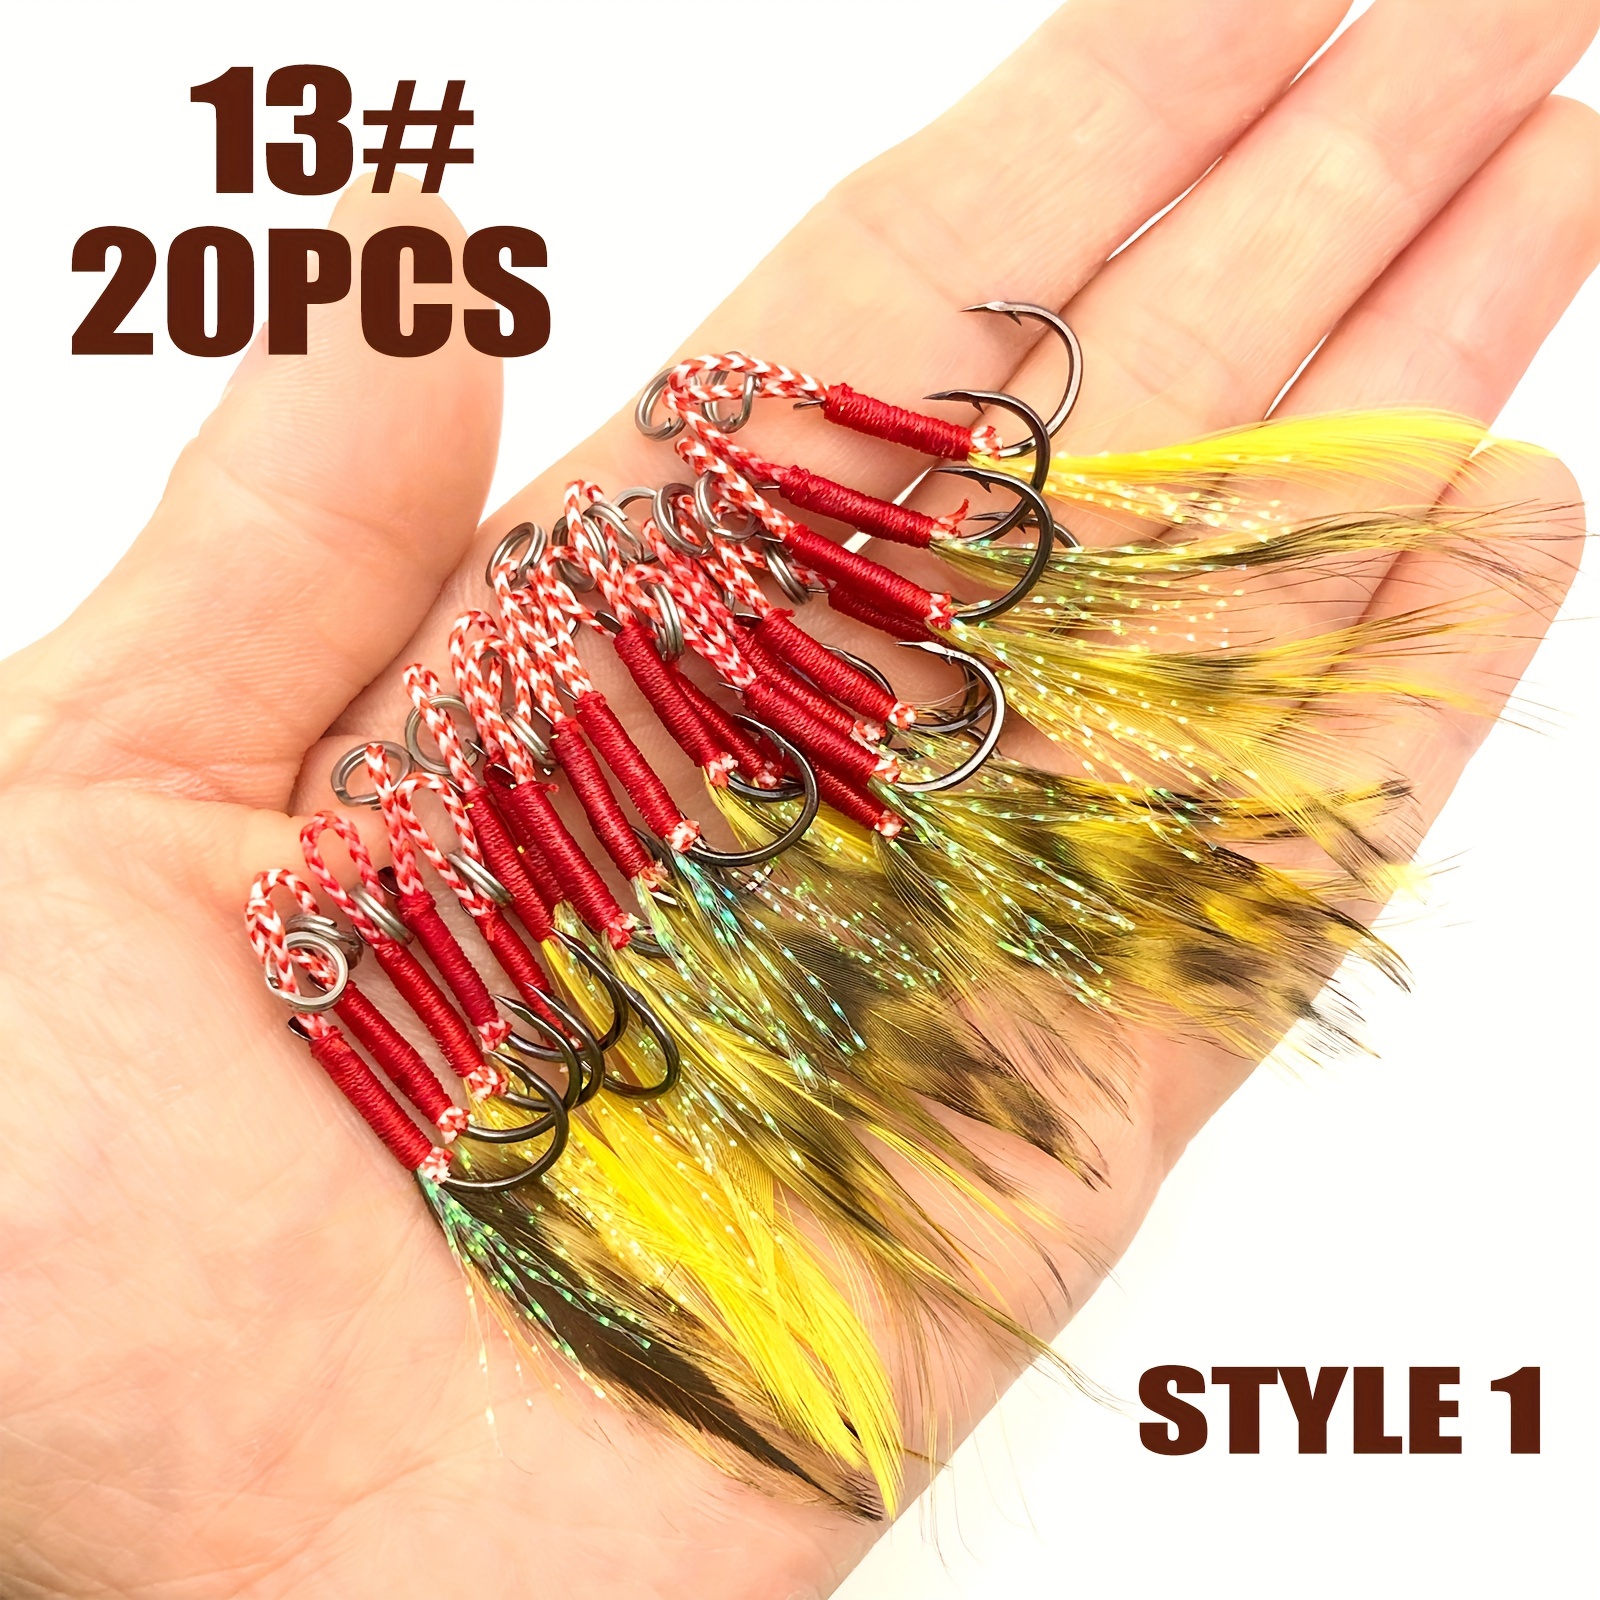 

20pcs Fishing Assist Jig Hooks, Barbed Hook With Feather Thread For Slow Jigging